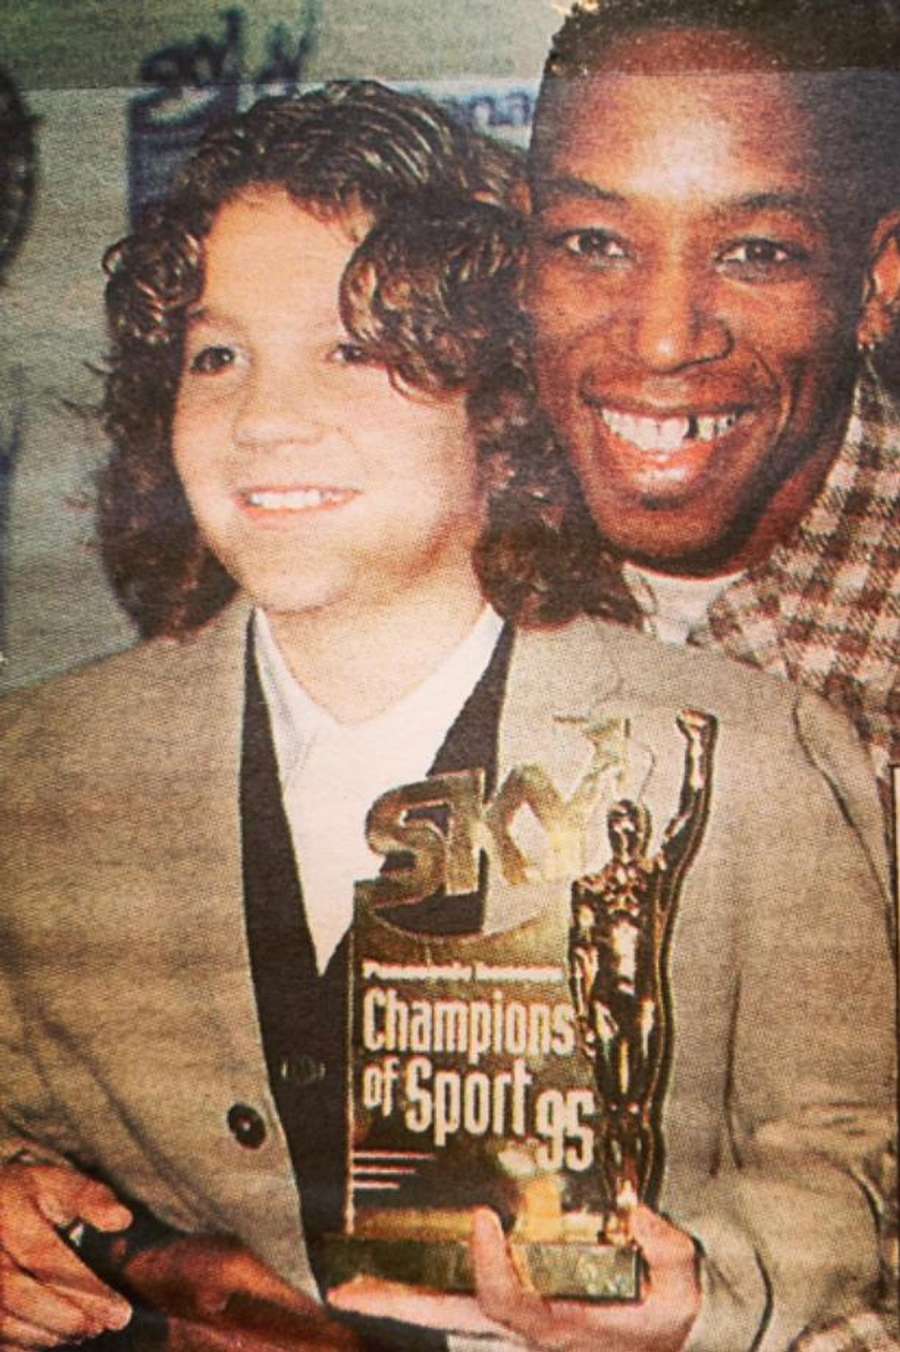 Young Sonny with Ian Wright.